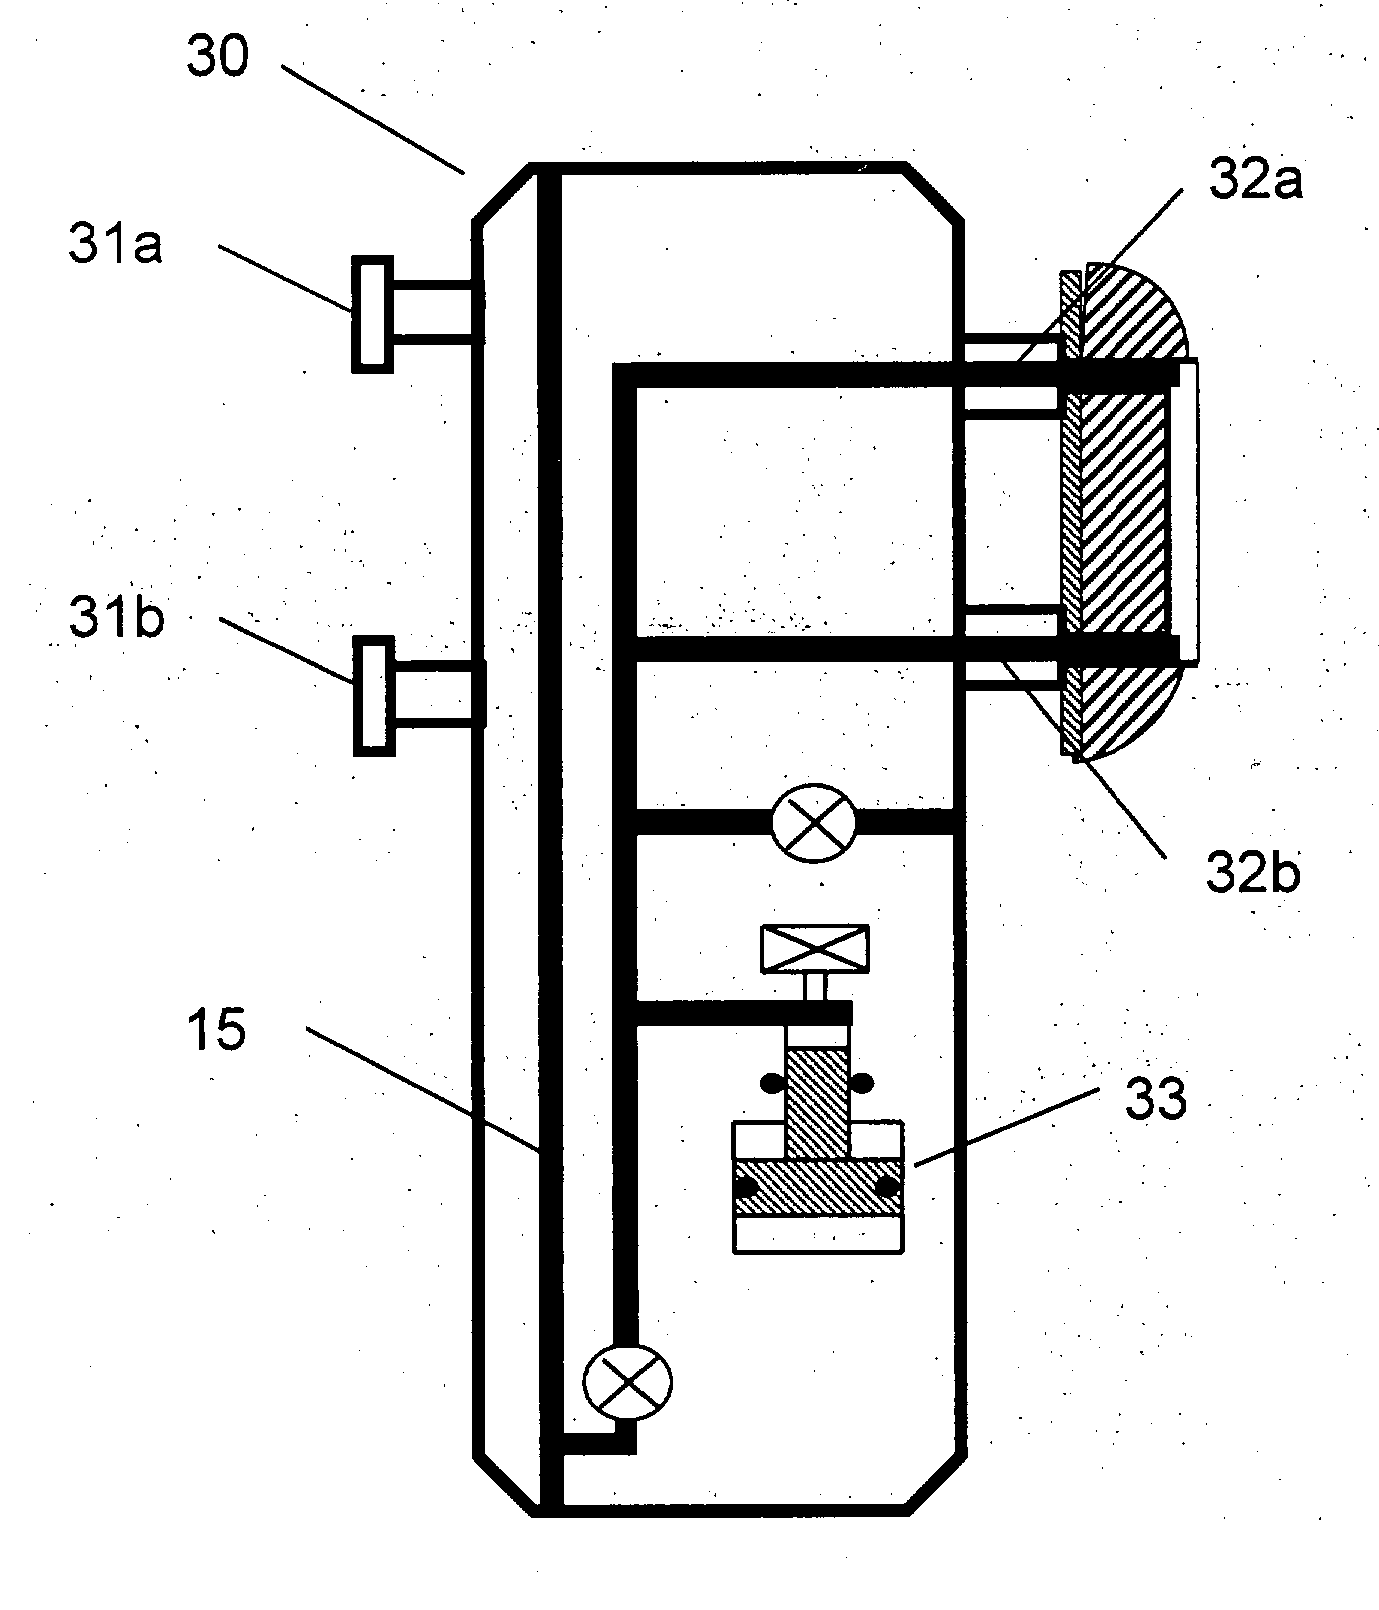 Formation testing and sampling apparatus and methods